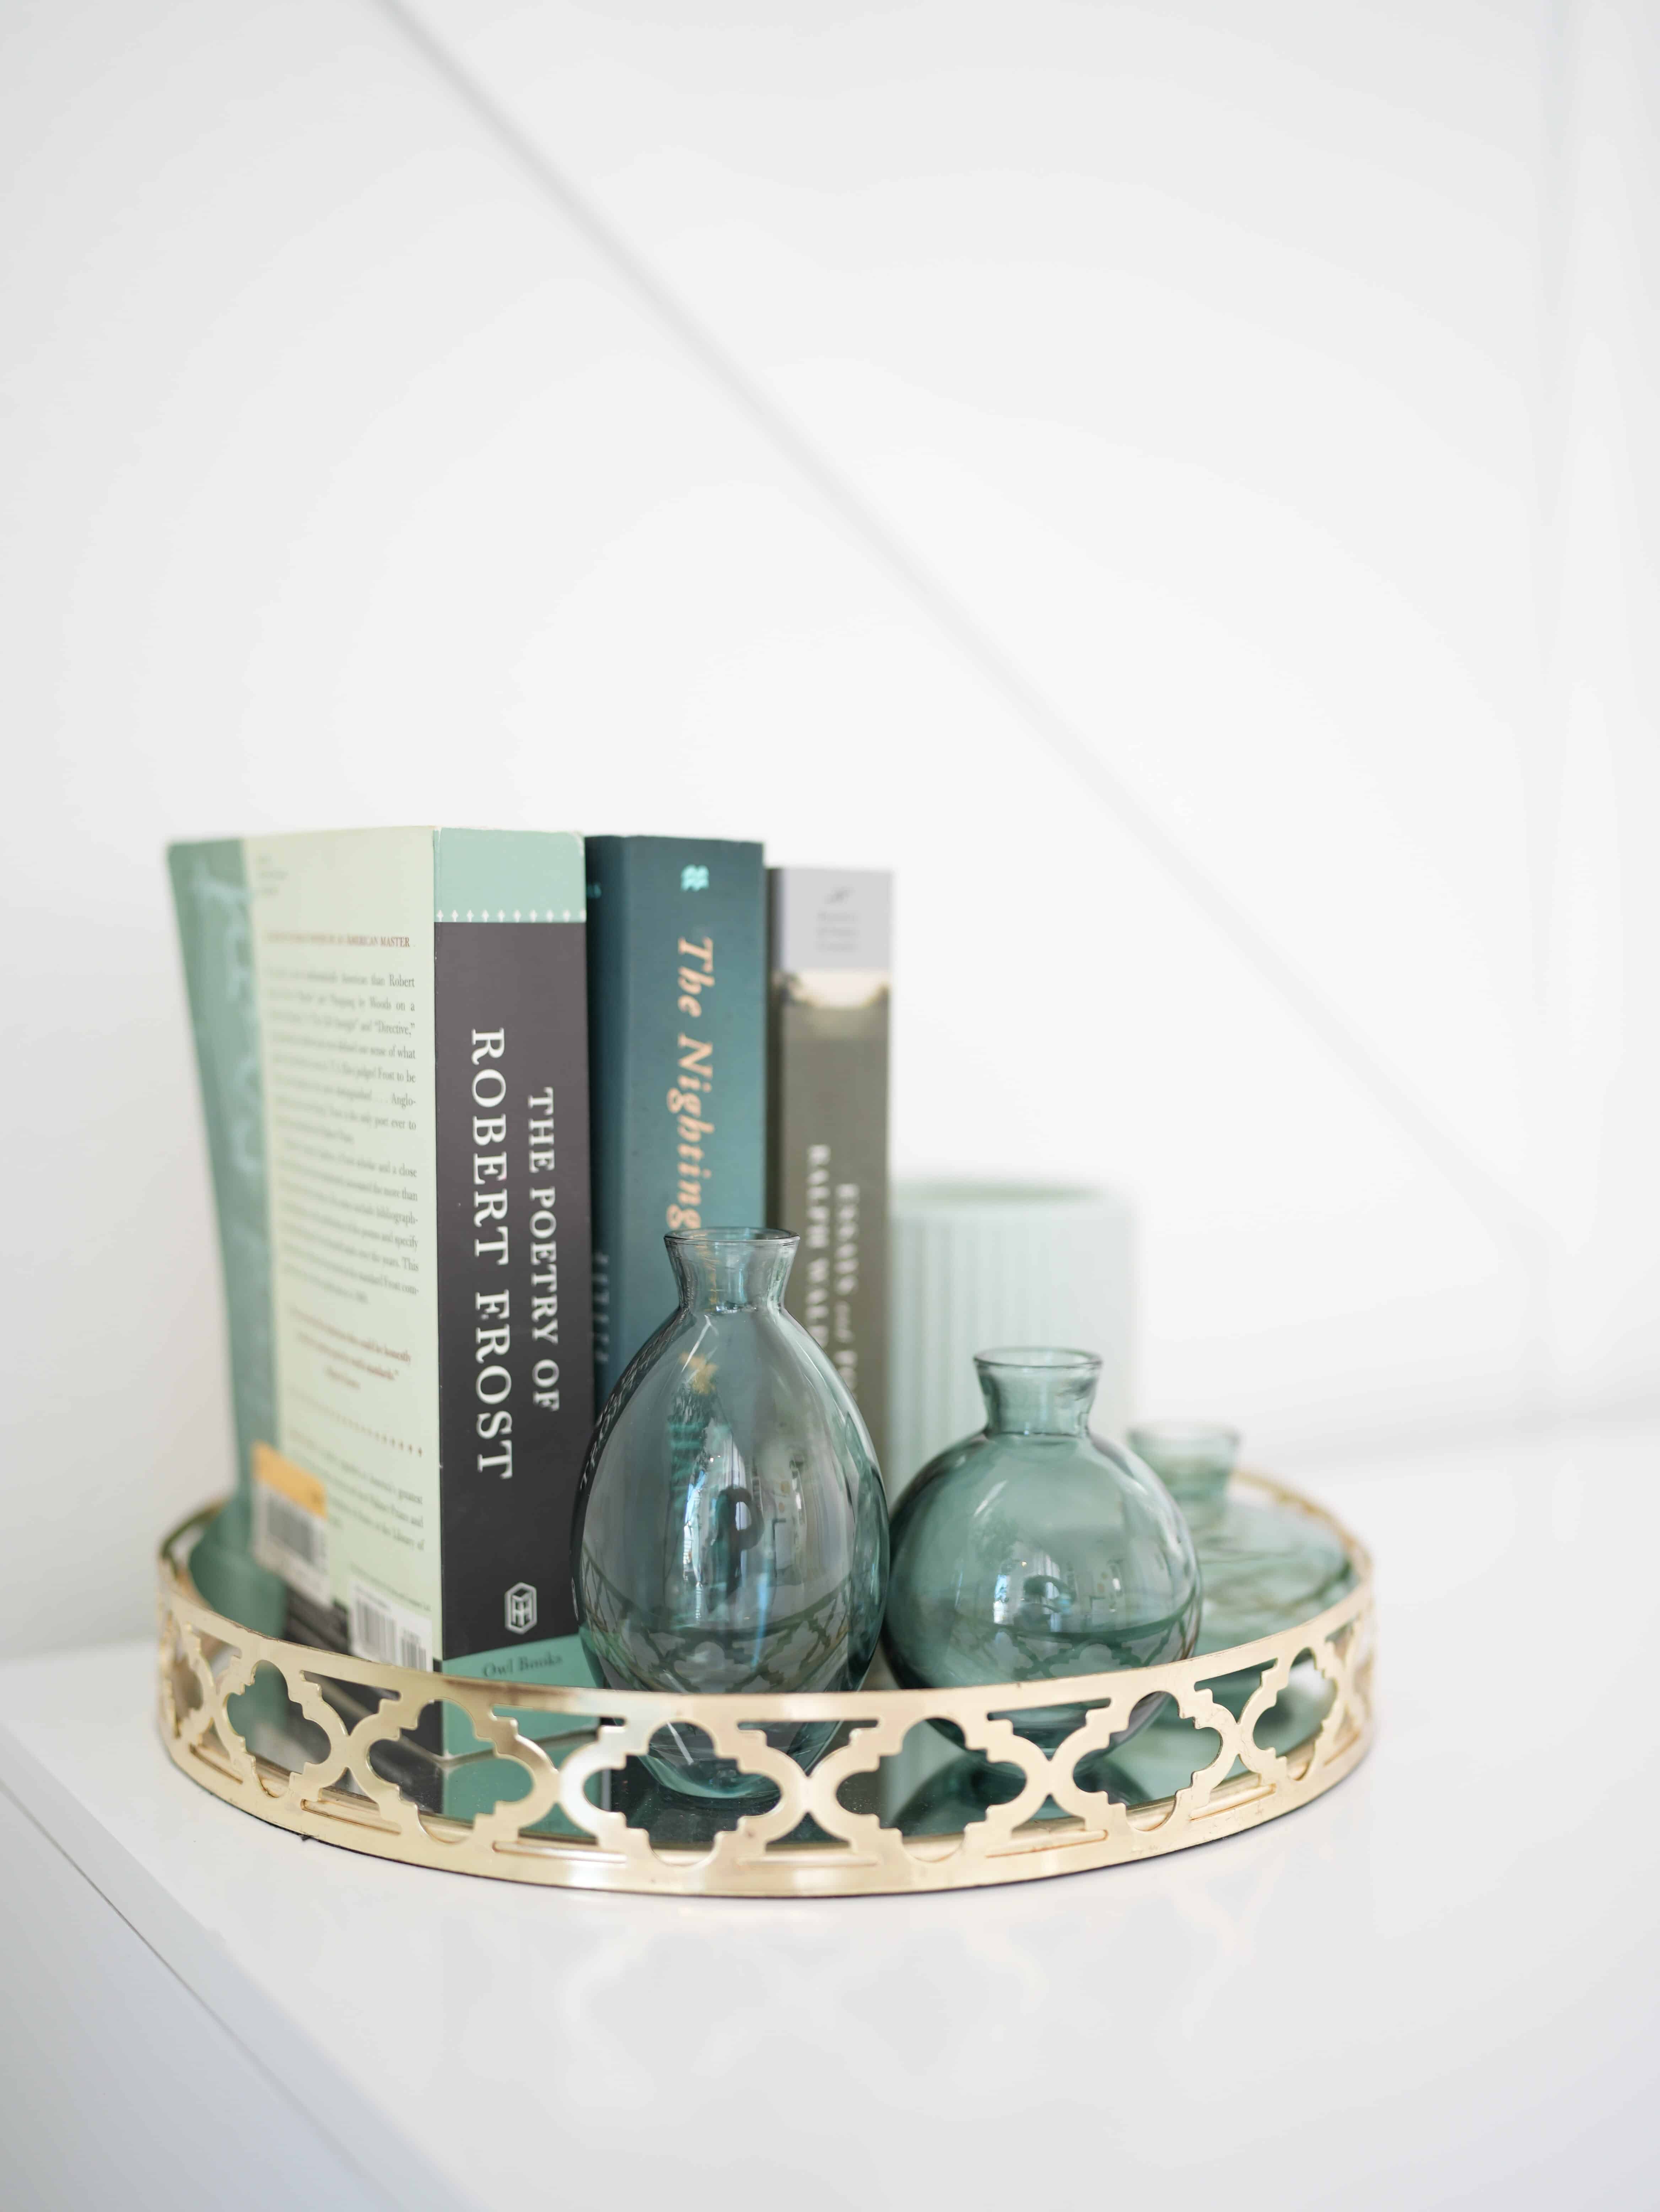 Round and shallow golden tray with three small glass vases inside, along with three thick paperback books in shades of blue and green, and a teal candle.